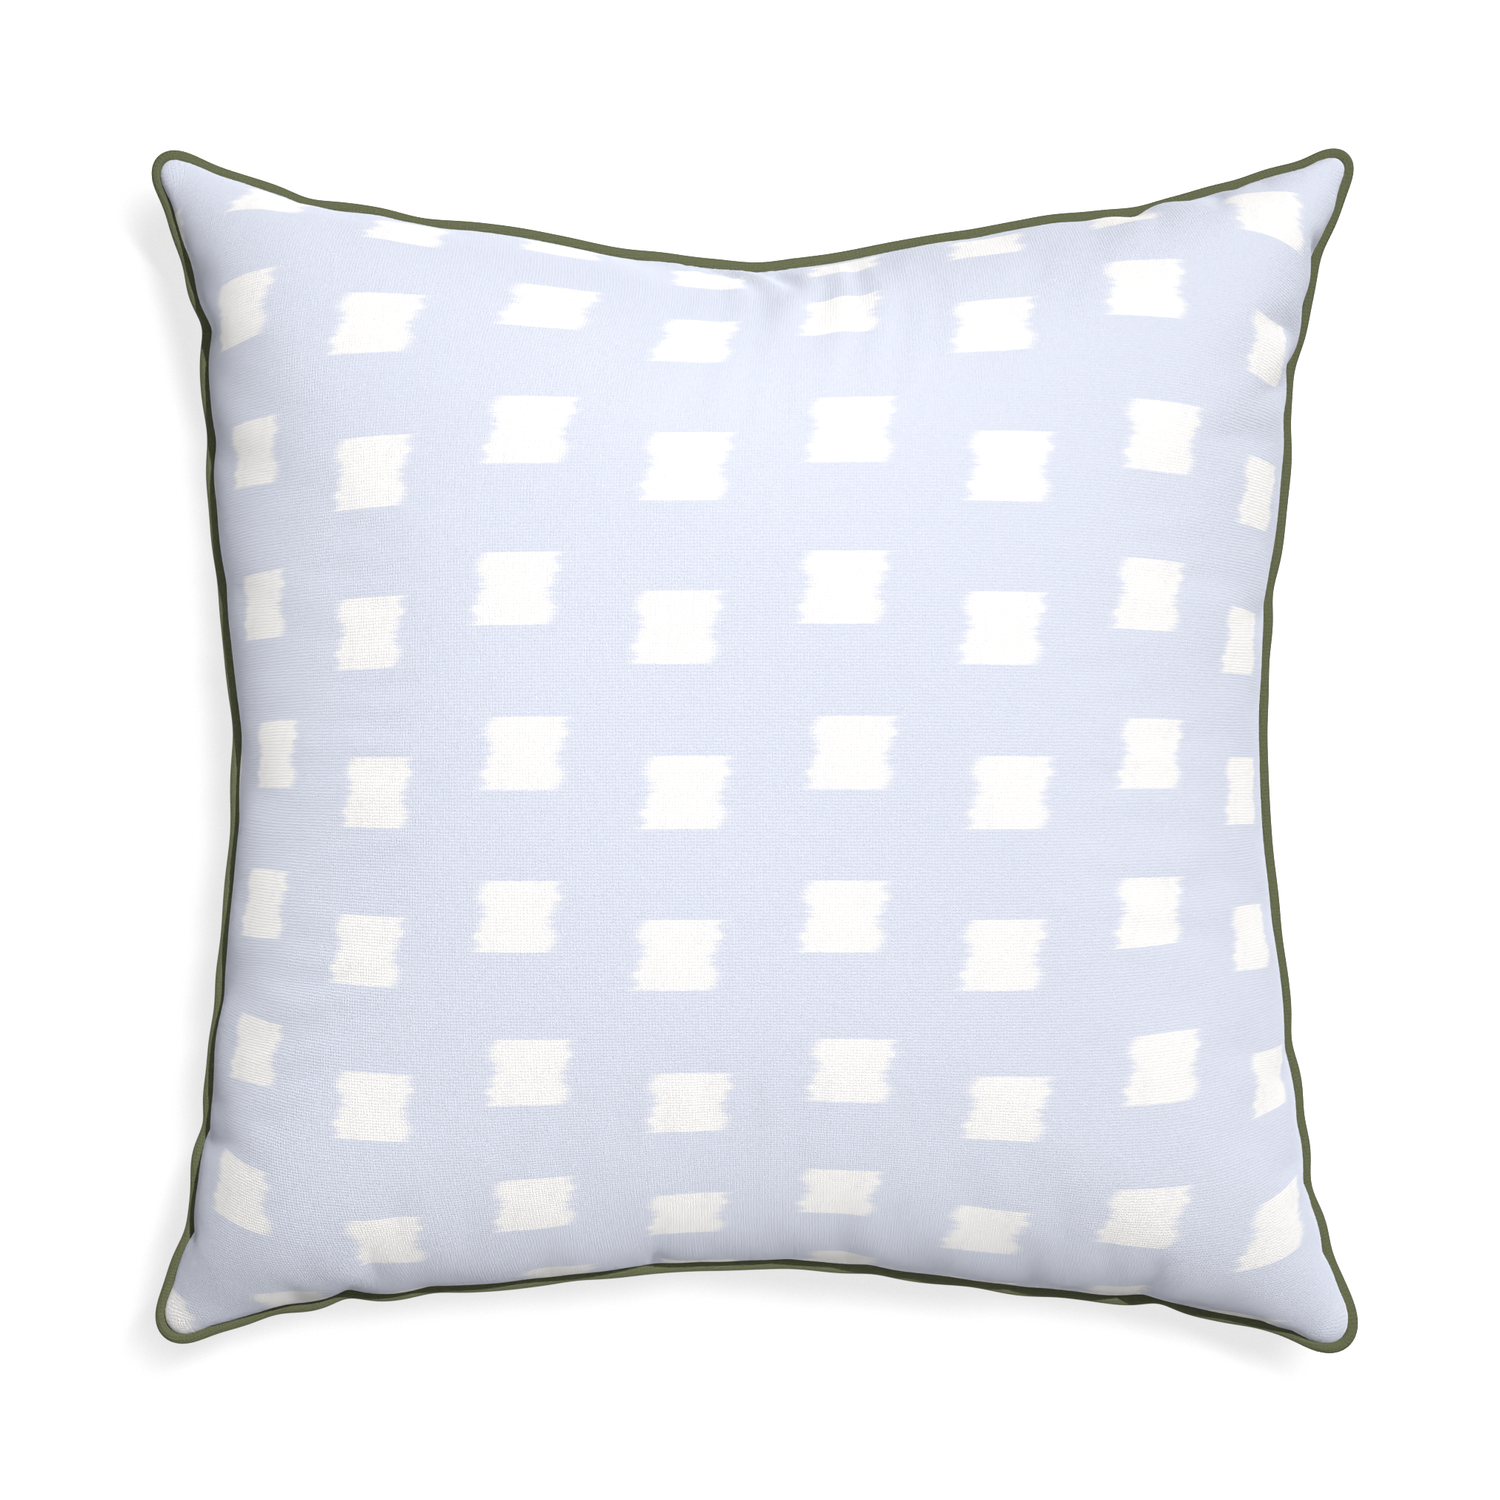 Euro-sham denton custom sky blue patternpillow with f piping on white background